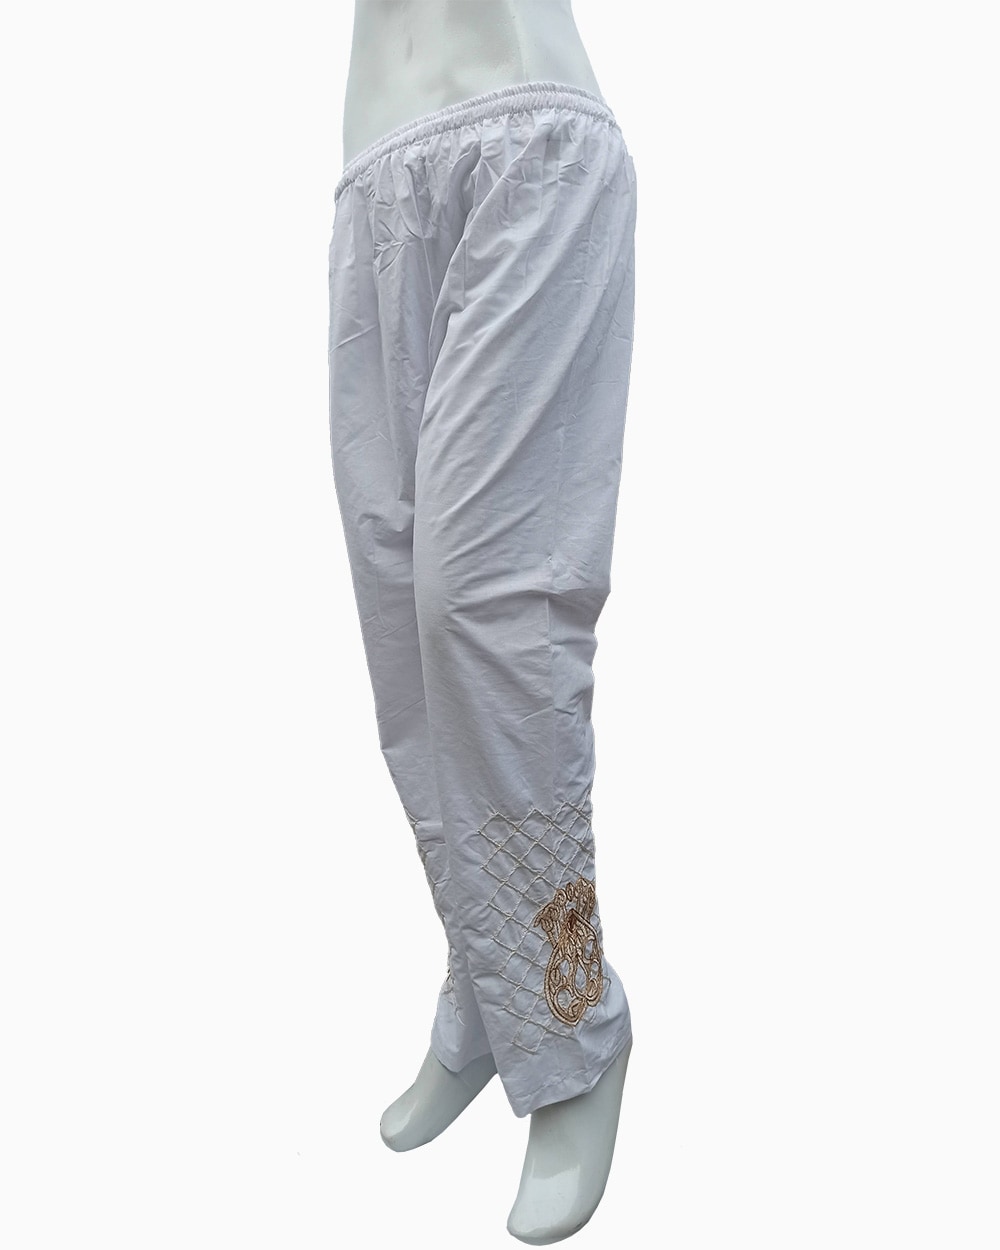 embroidered cotton blend trousers-biggest female trouser collection-white trouser designs (5)